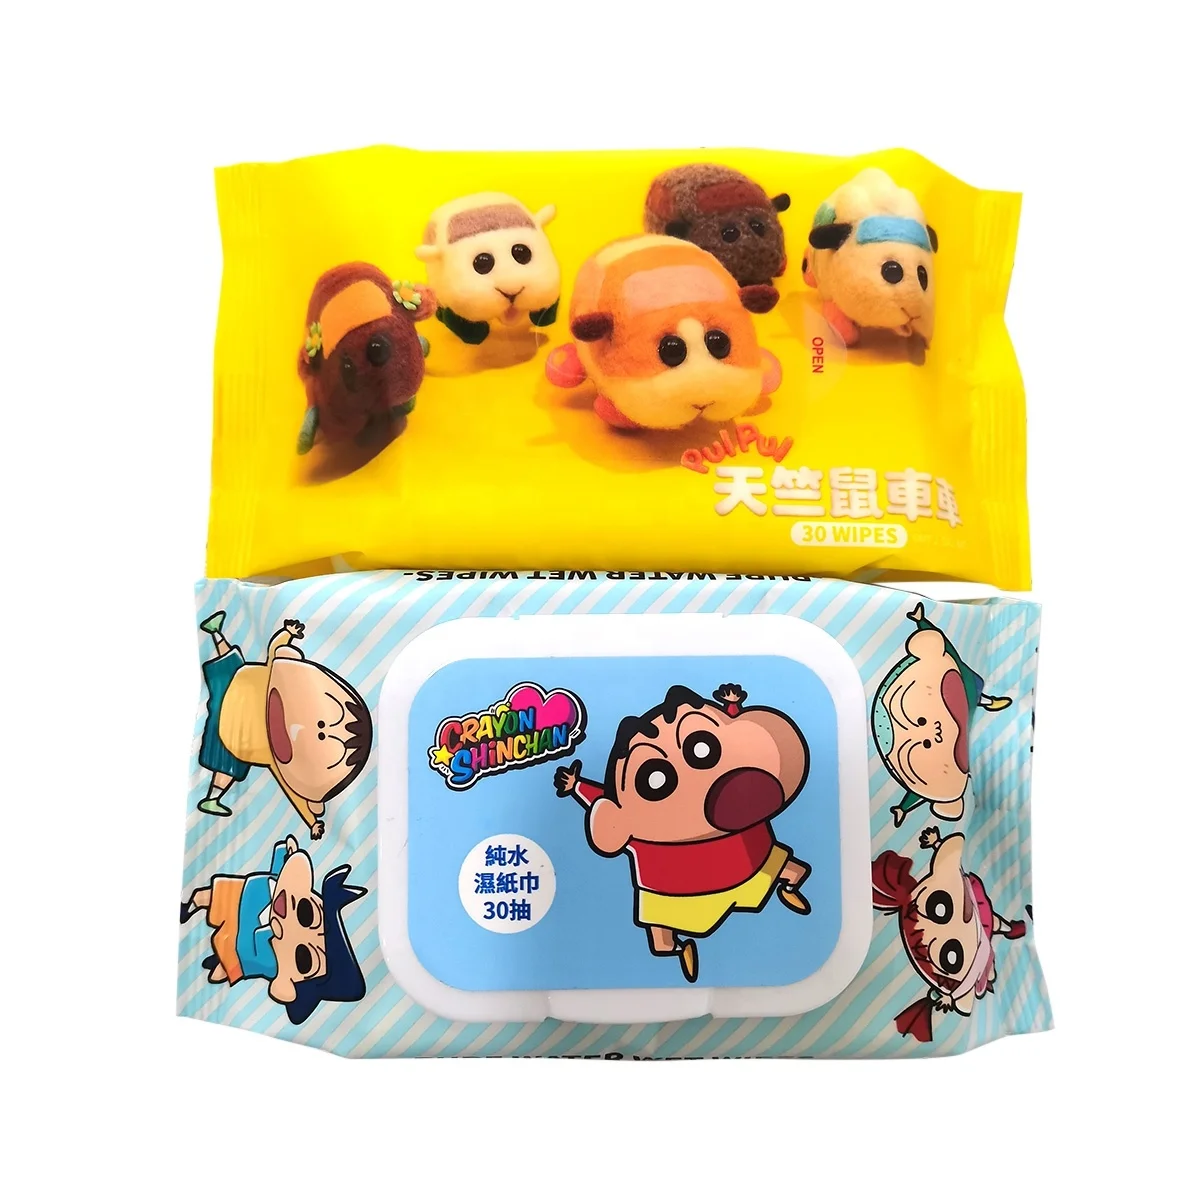 Private Label No Alcoholic Factory Supply manufacture in China cheap baby cleaning wipes top quality baby wet wipes